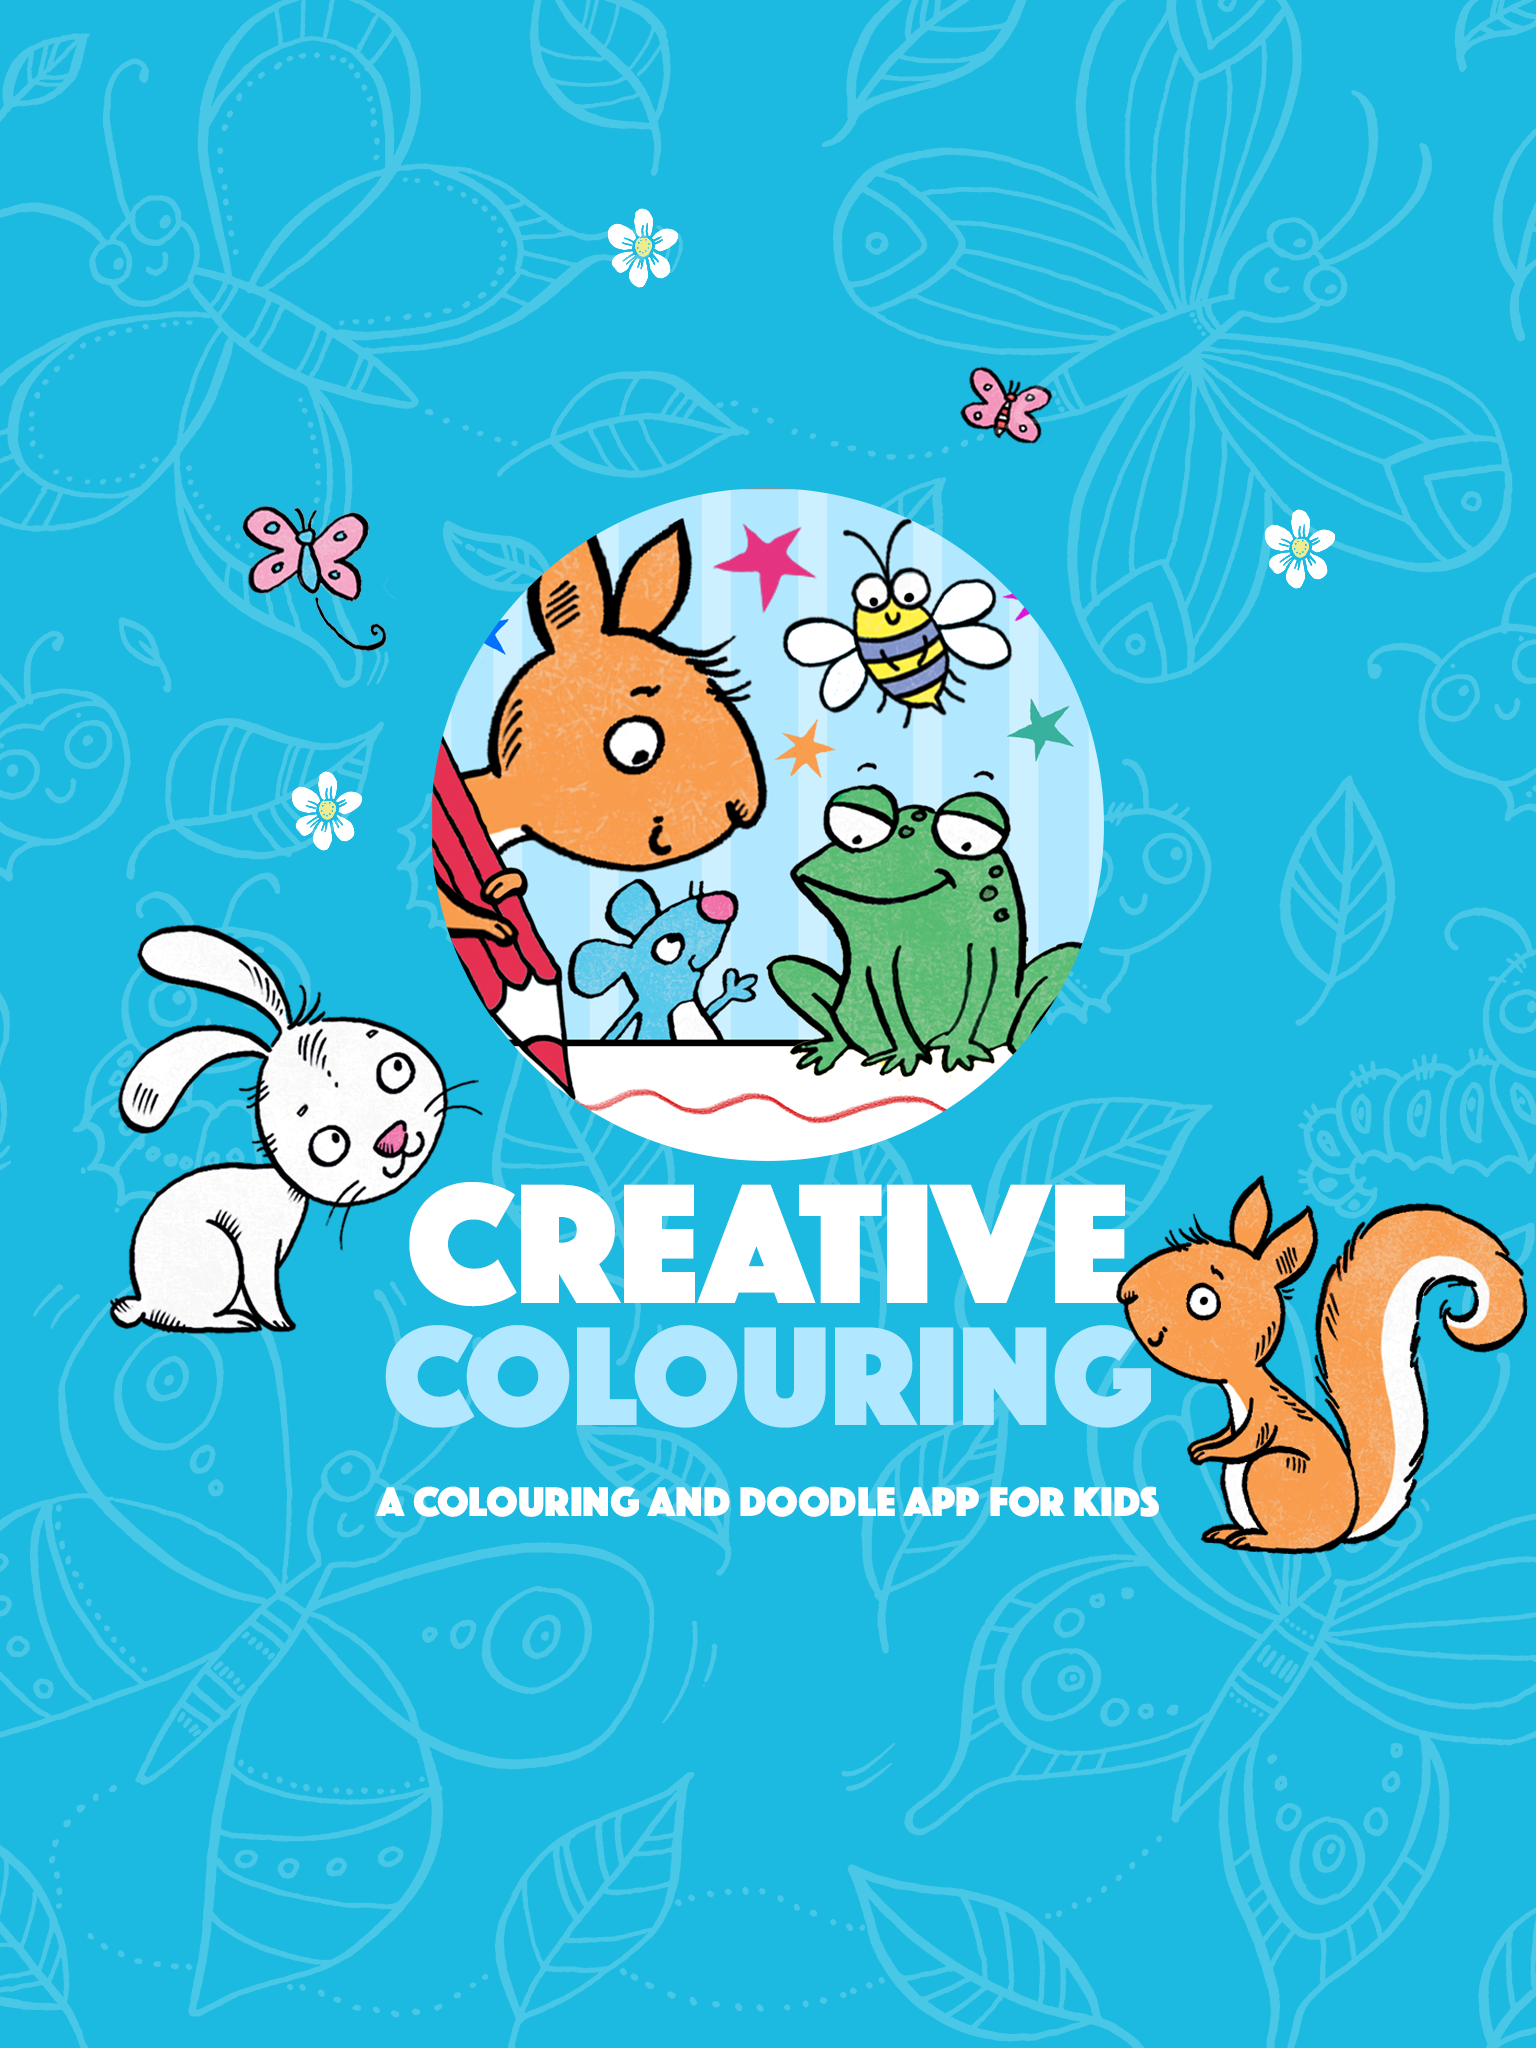 Children's colouring app for Independent Publisher, Buster Books